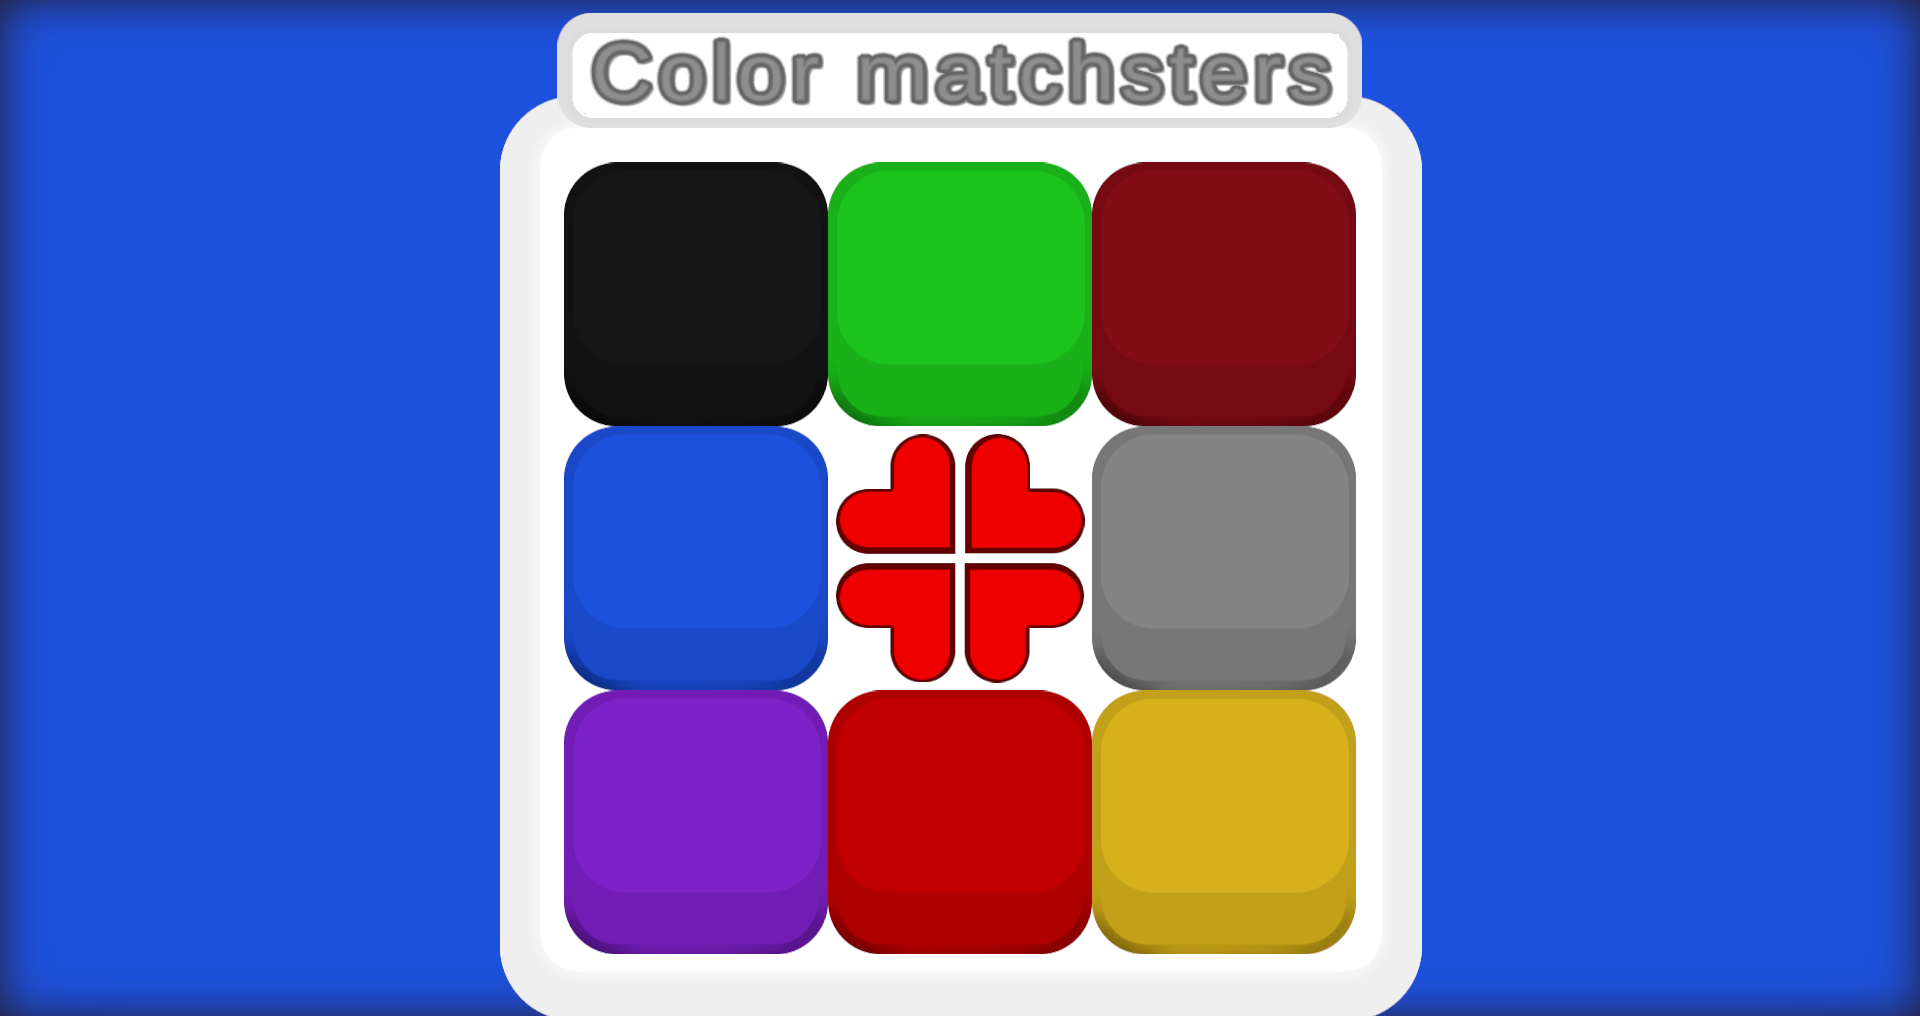 Color matchsters